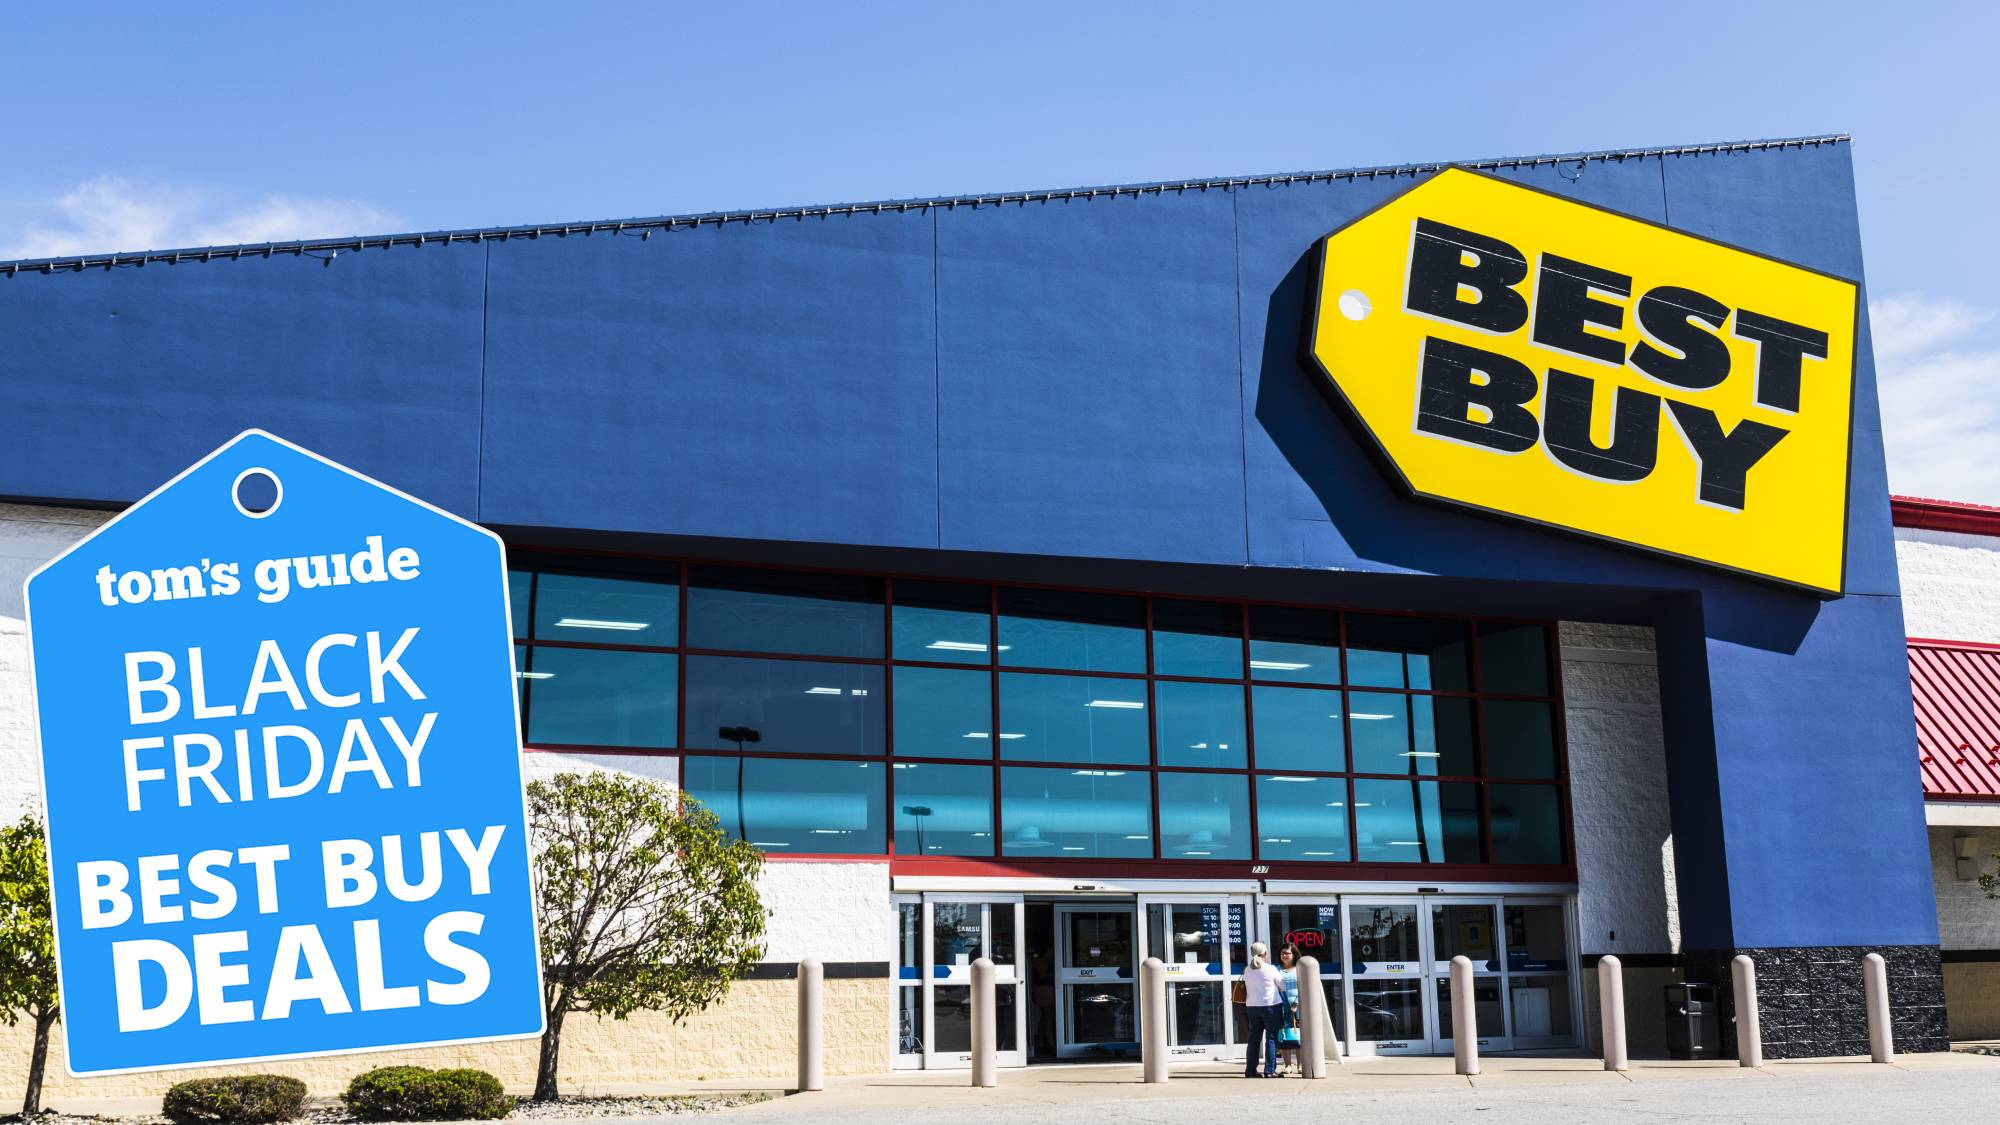 Best Buy Black Friday deals 2021 — the best sales right now Tom's Guide